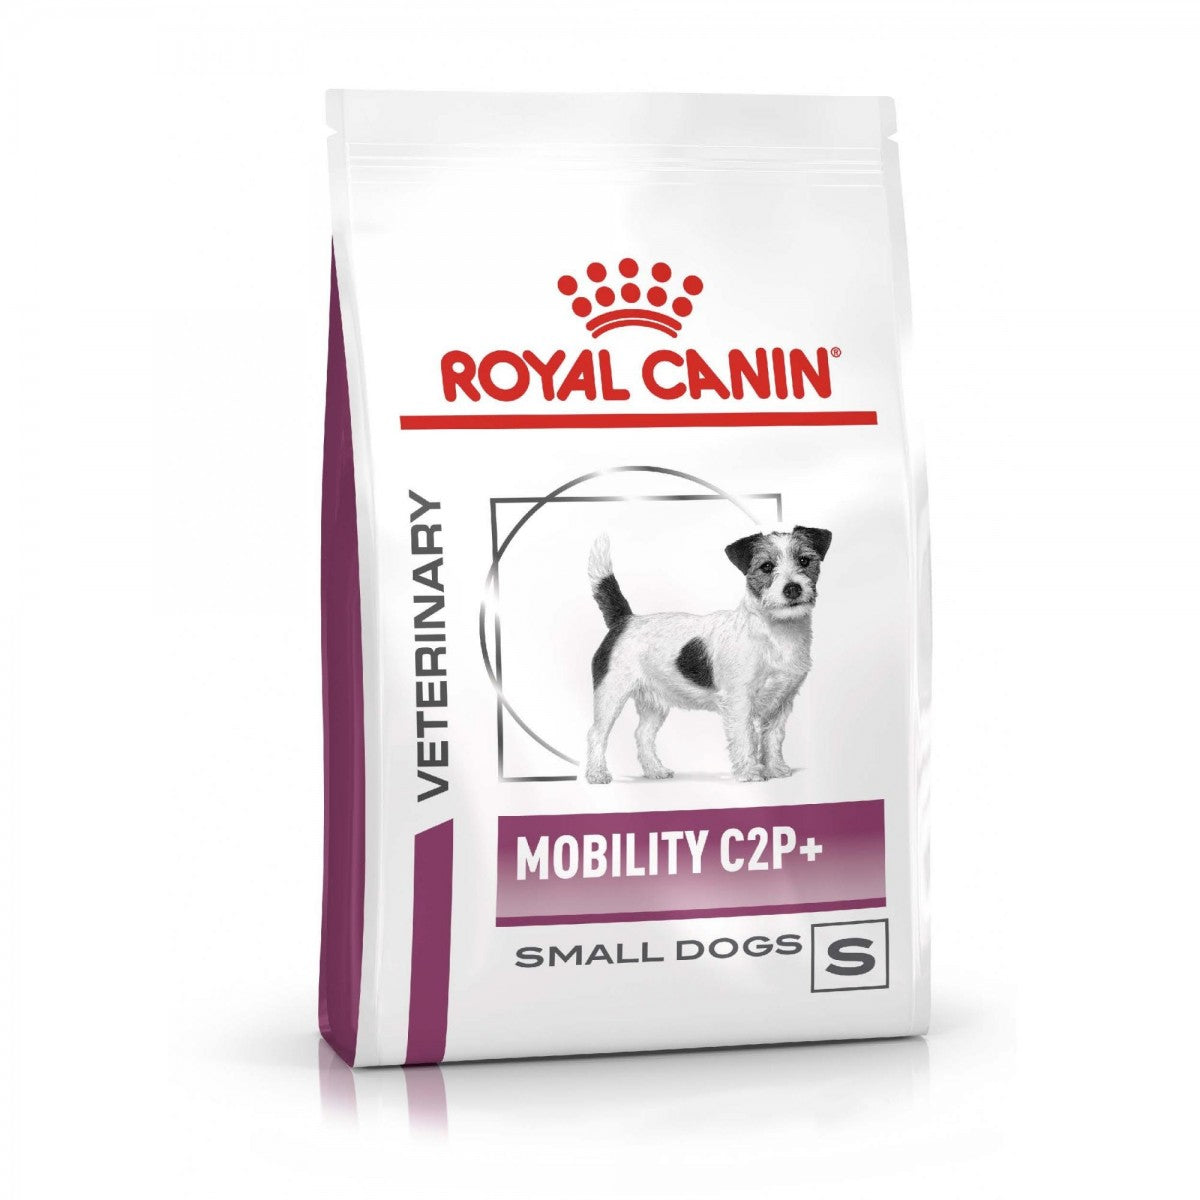 Royal Canin - Canine Mobility C2P+ Small Dog Dry Food 3.5kg